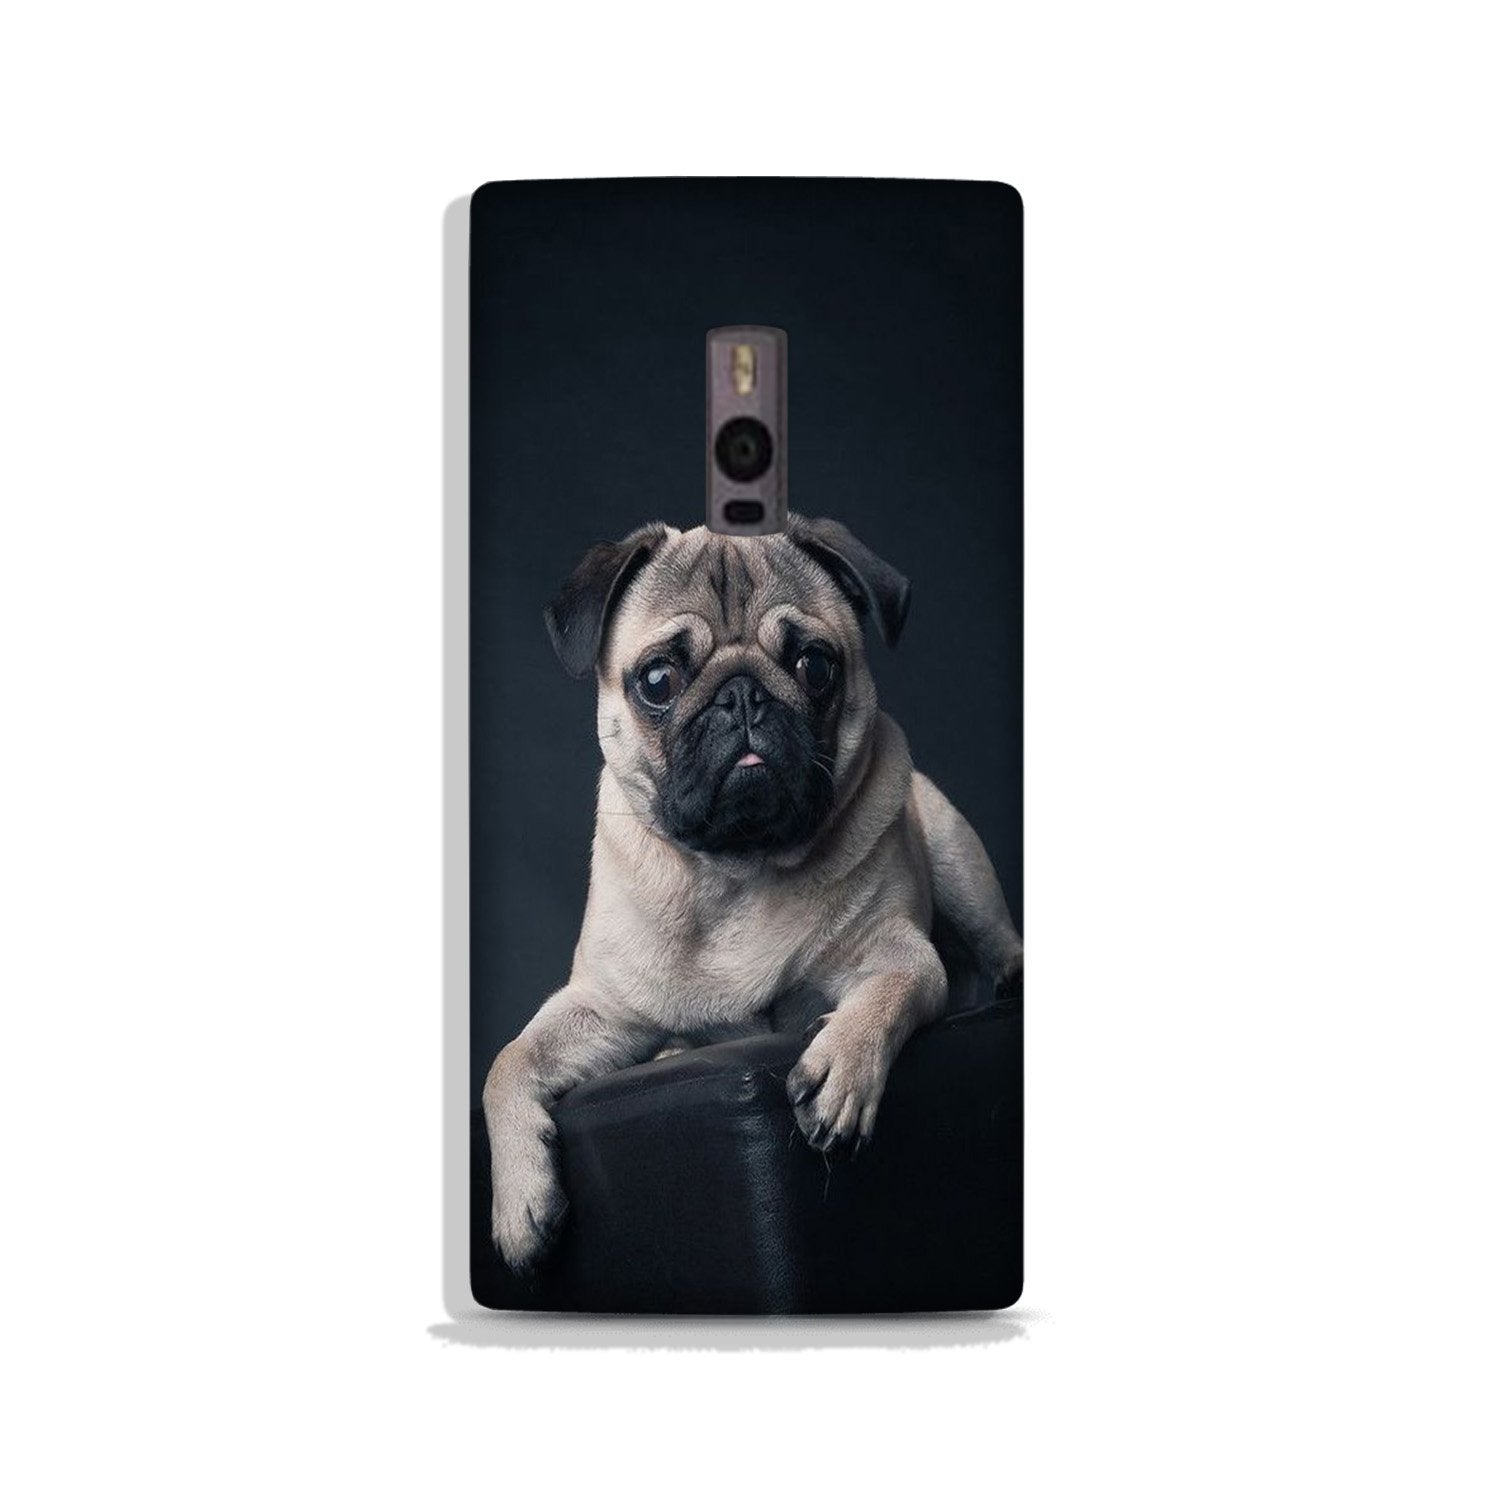 little Puppy Case for OnePlus 2